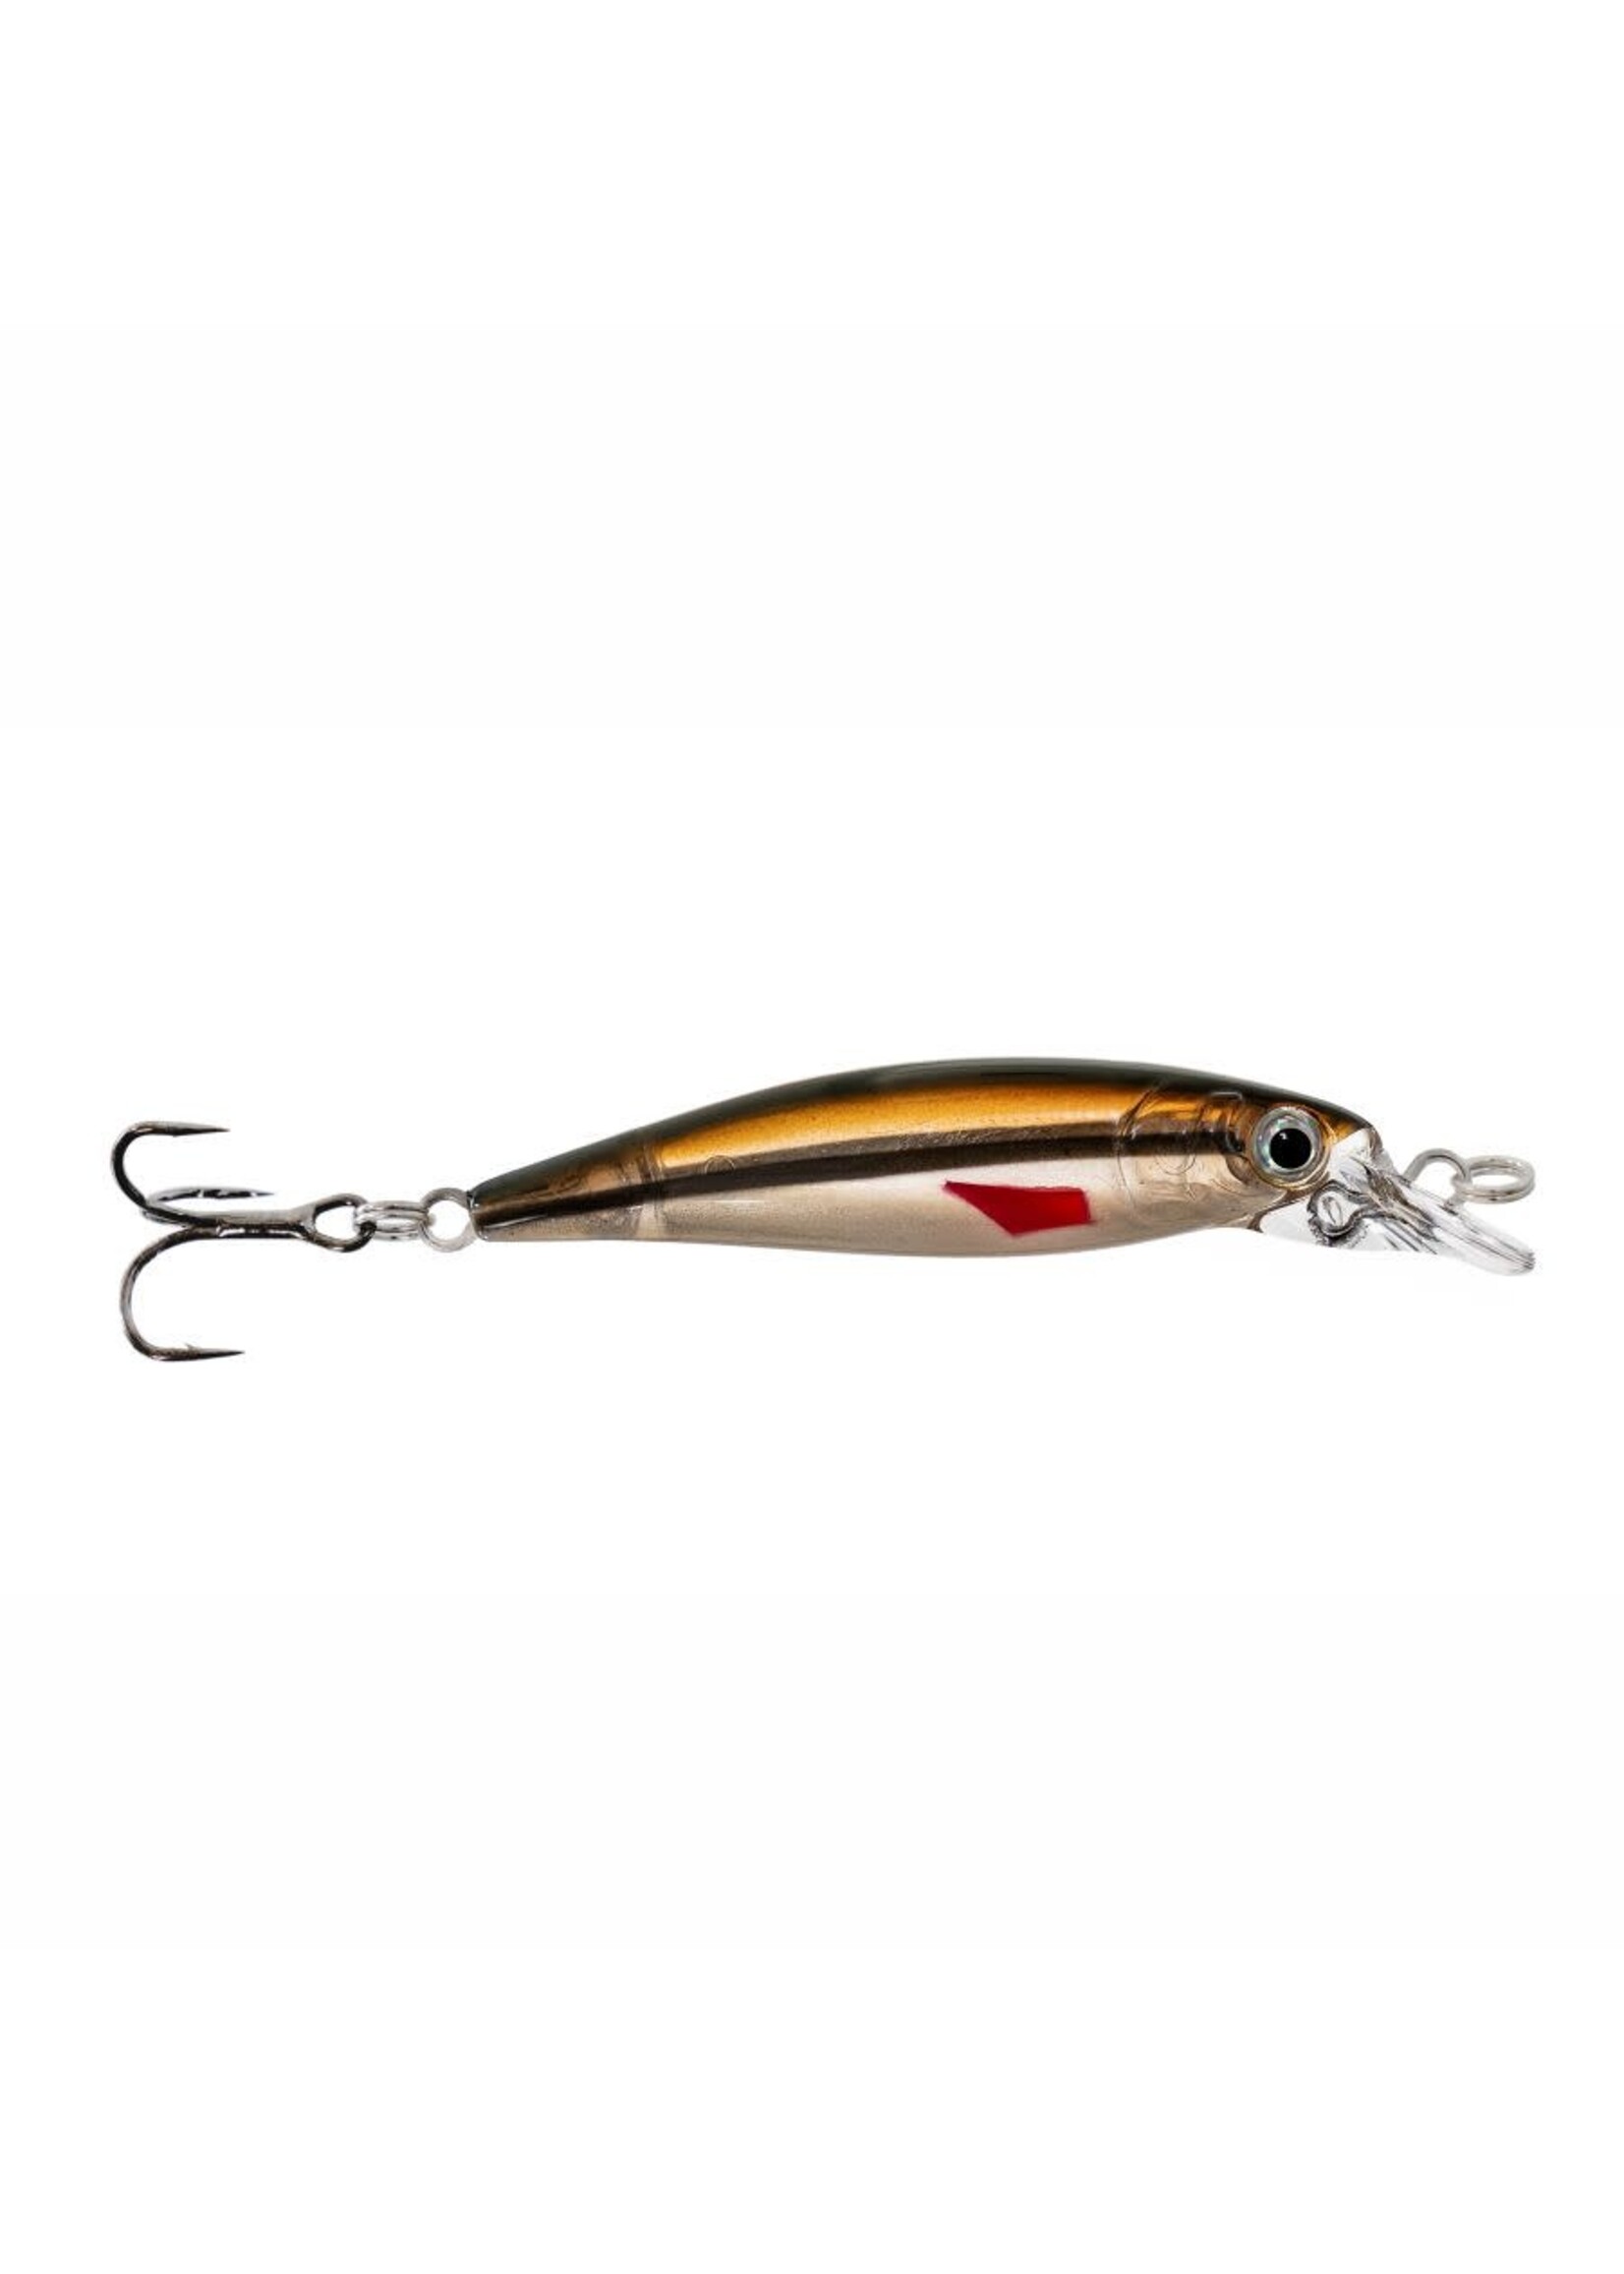 Dynamic Lures HD Trout (Gold Orange) – Trophy Trout Lures and Fly